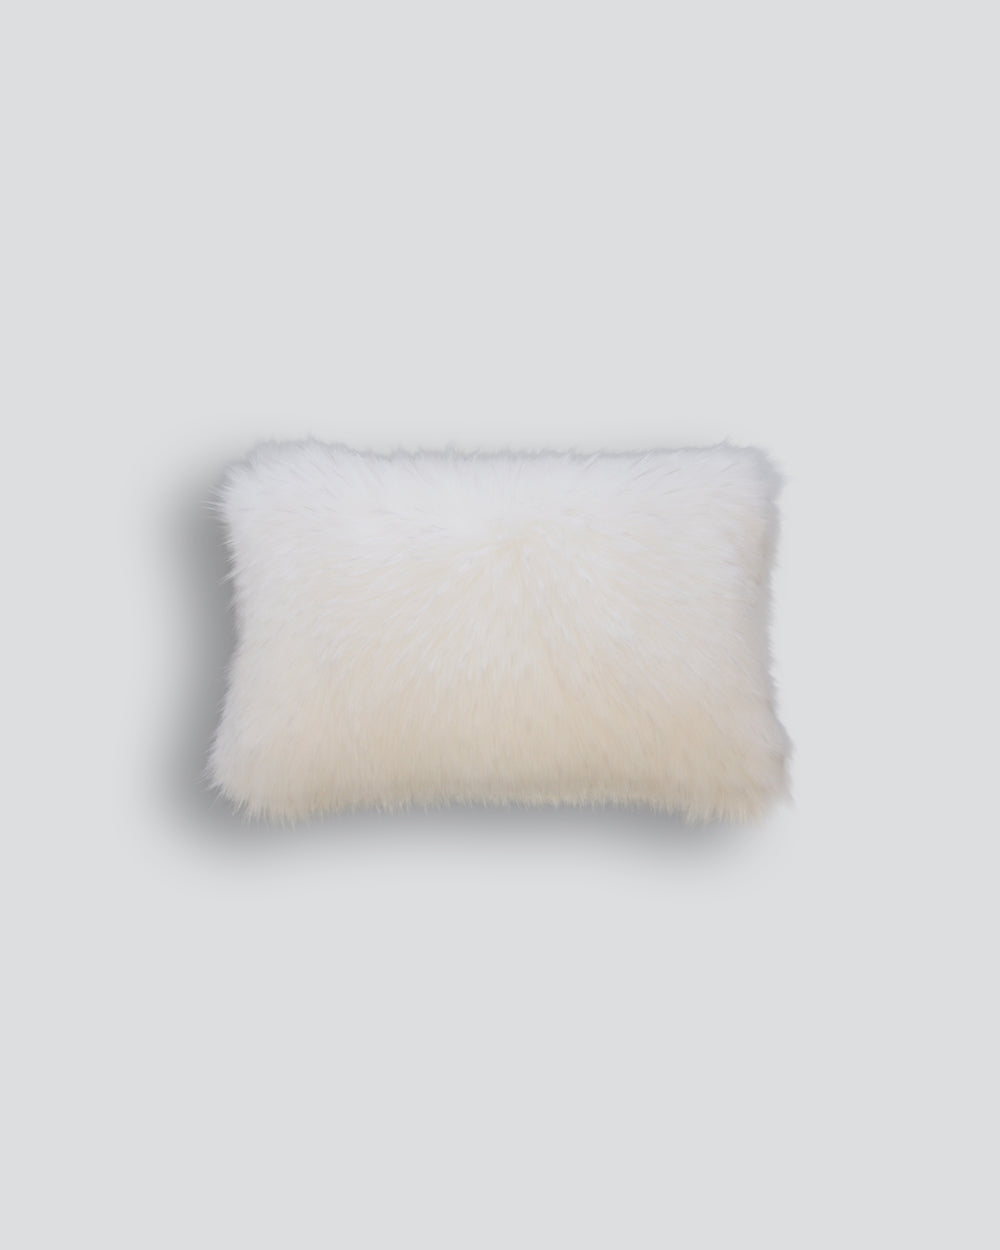 Heirloom Norwegian Fox Cushions in Faux Fur are available from Make Your House A Home Premium Stockist. Furniture Store Bendigo, Victoria. Australia Wide Delivery. Furtex Baya.